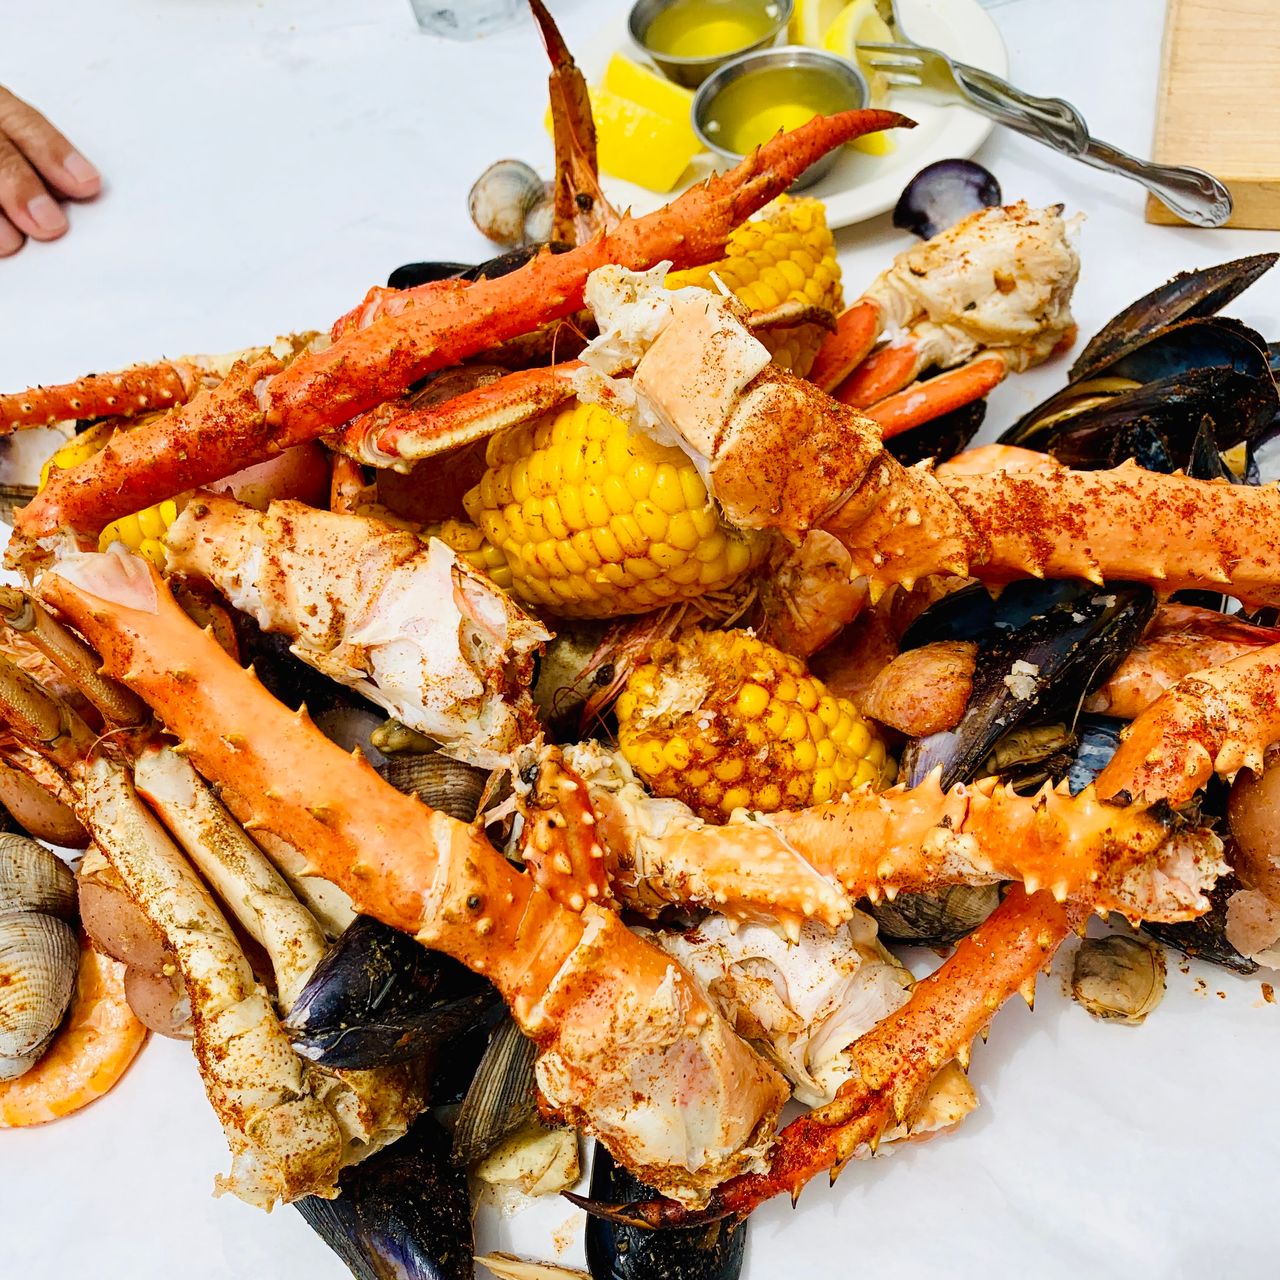 Backyard Crab Feed - A Party For Your Palate